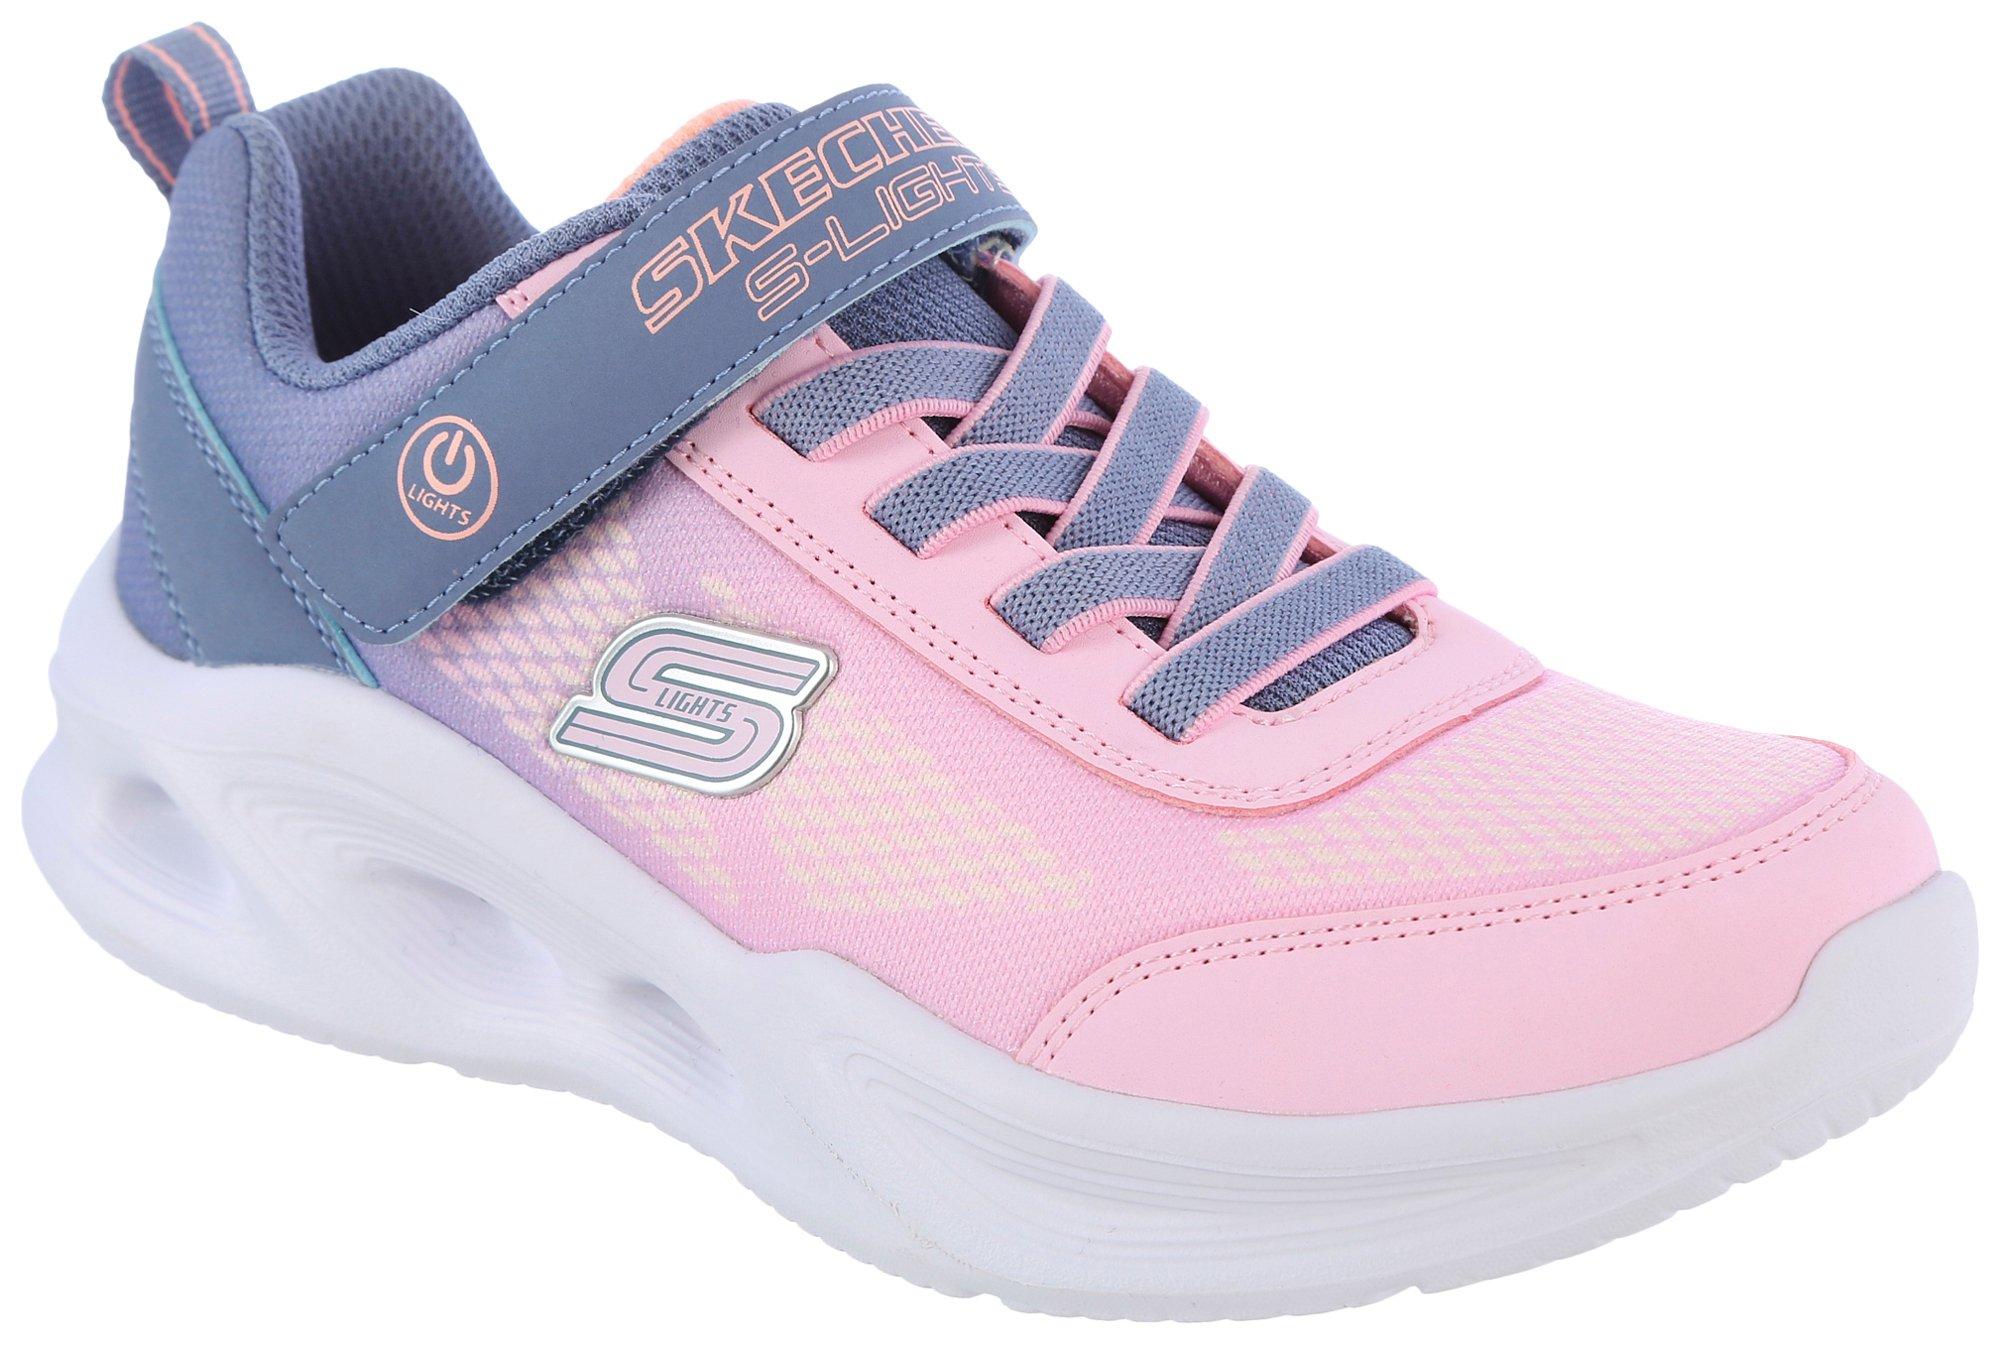 Skechers Girls Sola Glow Athletic Shoes